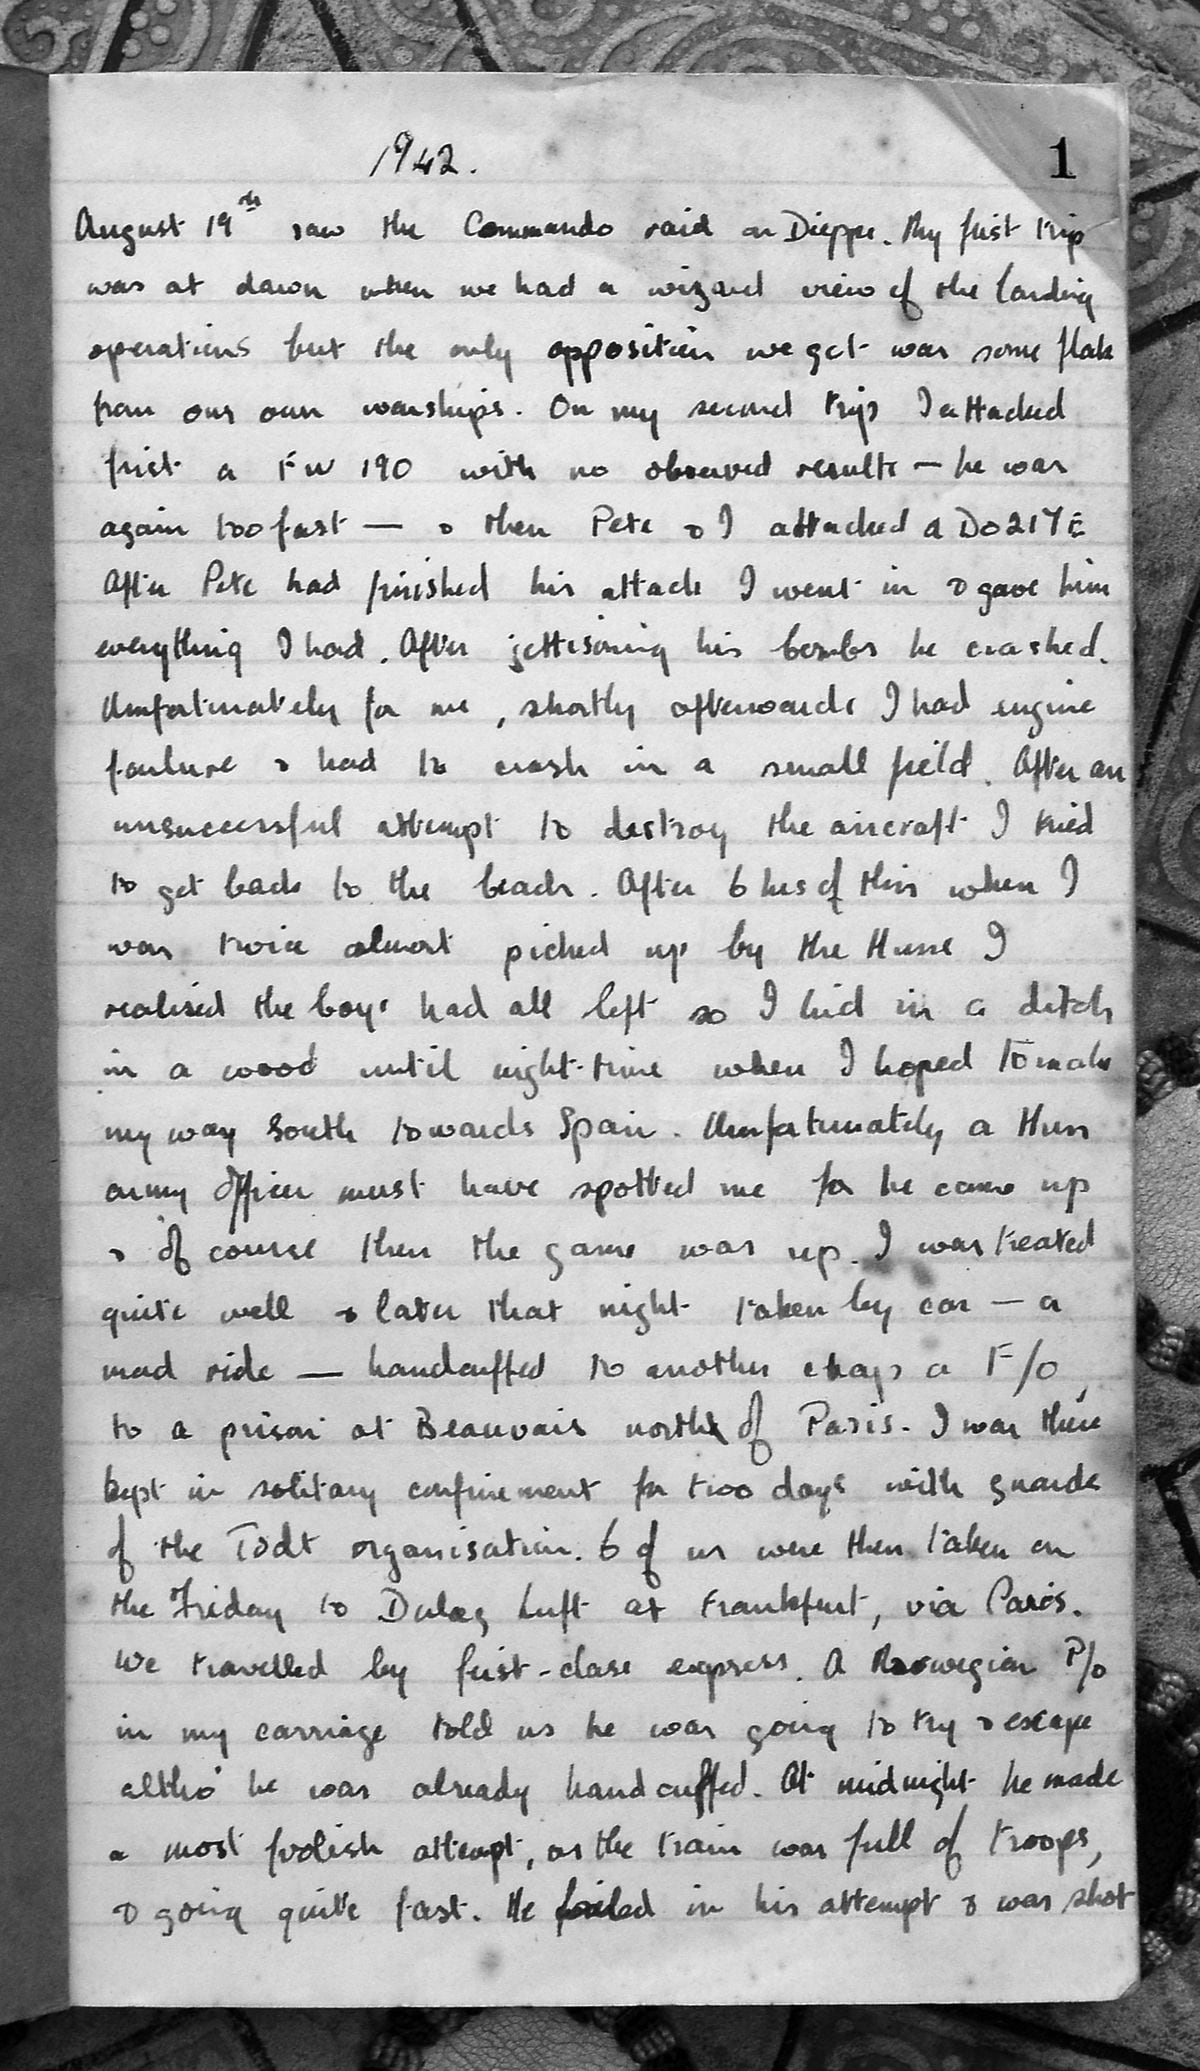 In this diary extract John tells how he was captured